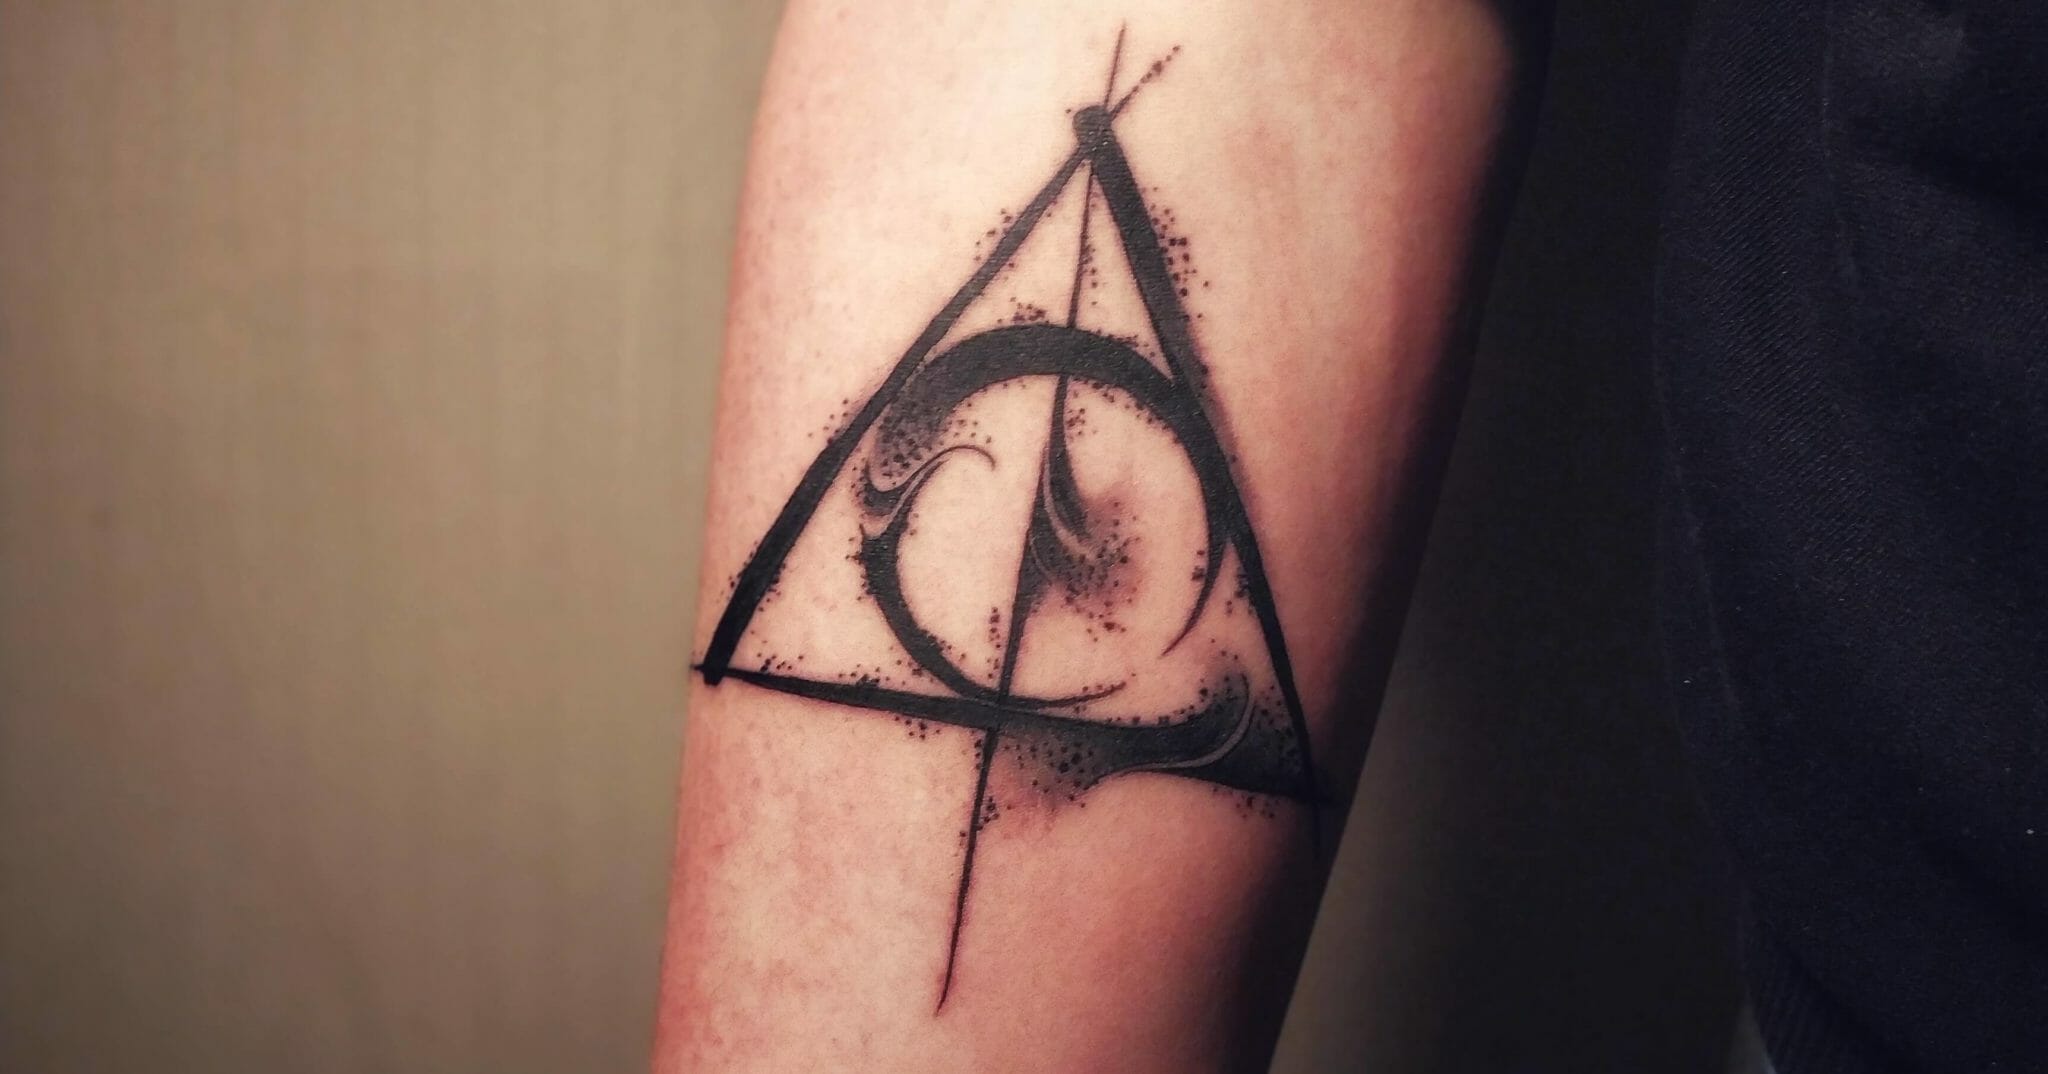 101 Awesome Deathly Hallows Tattoo Designs You Need To See Outsons Men S Fashion Tips And Style Guide For 2020